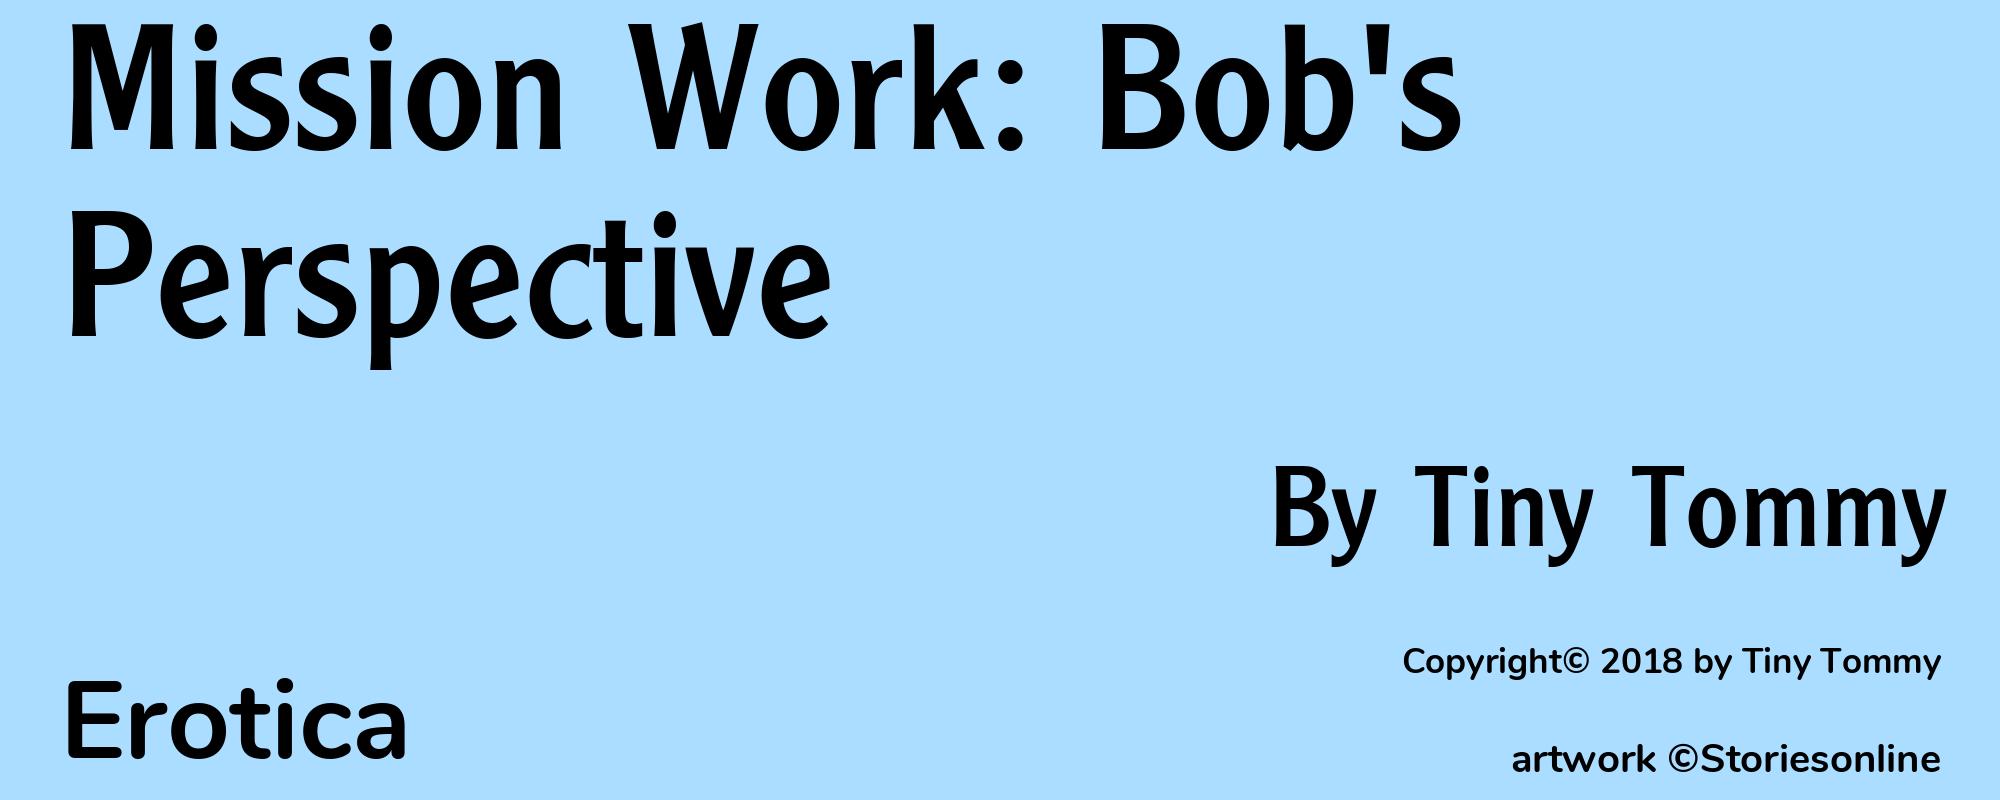 Mission Work: Bob's Perspective - Cover